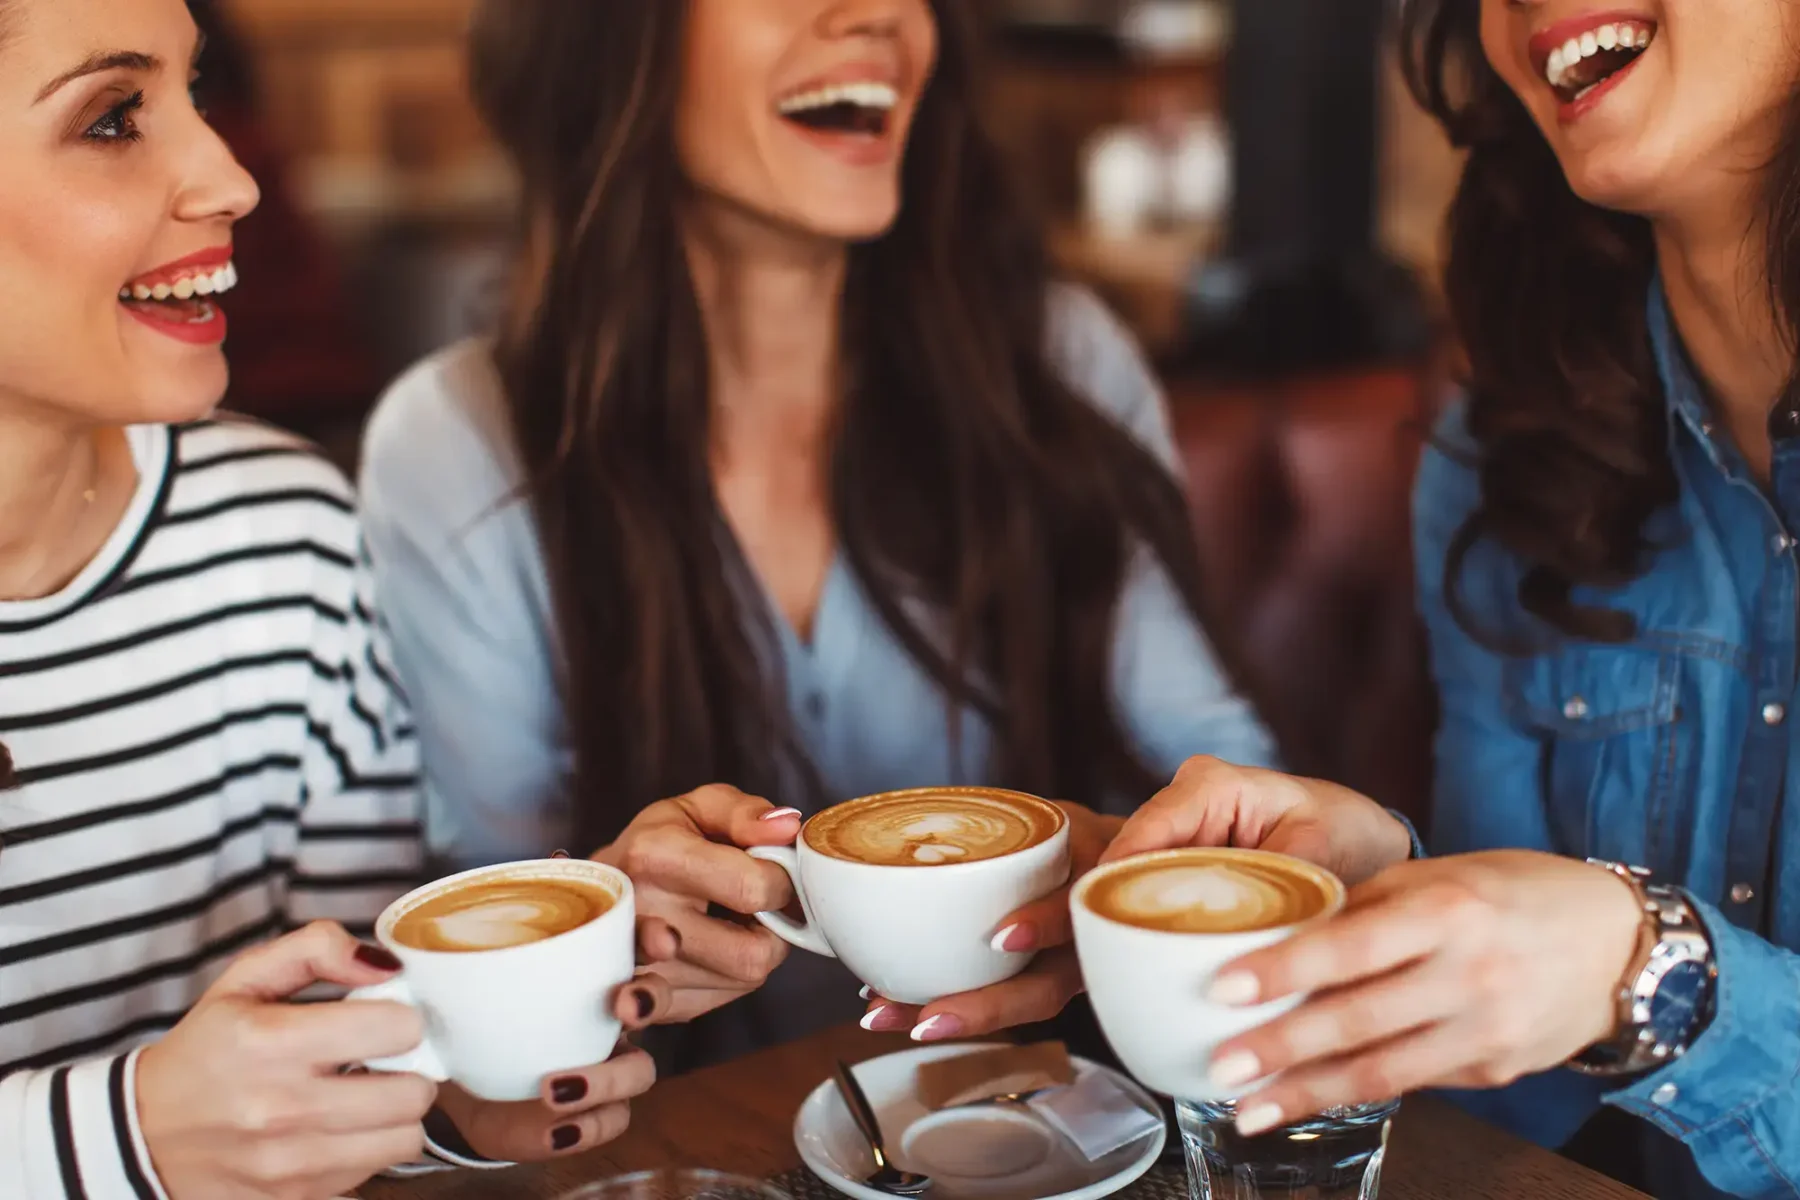 Group of young women with coffee drink smiling and laughing in a cafe